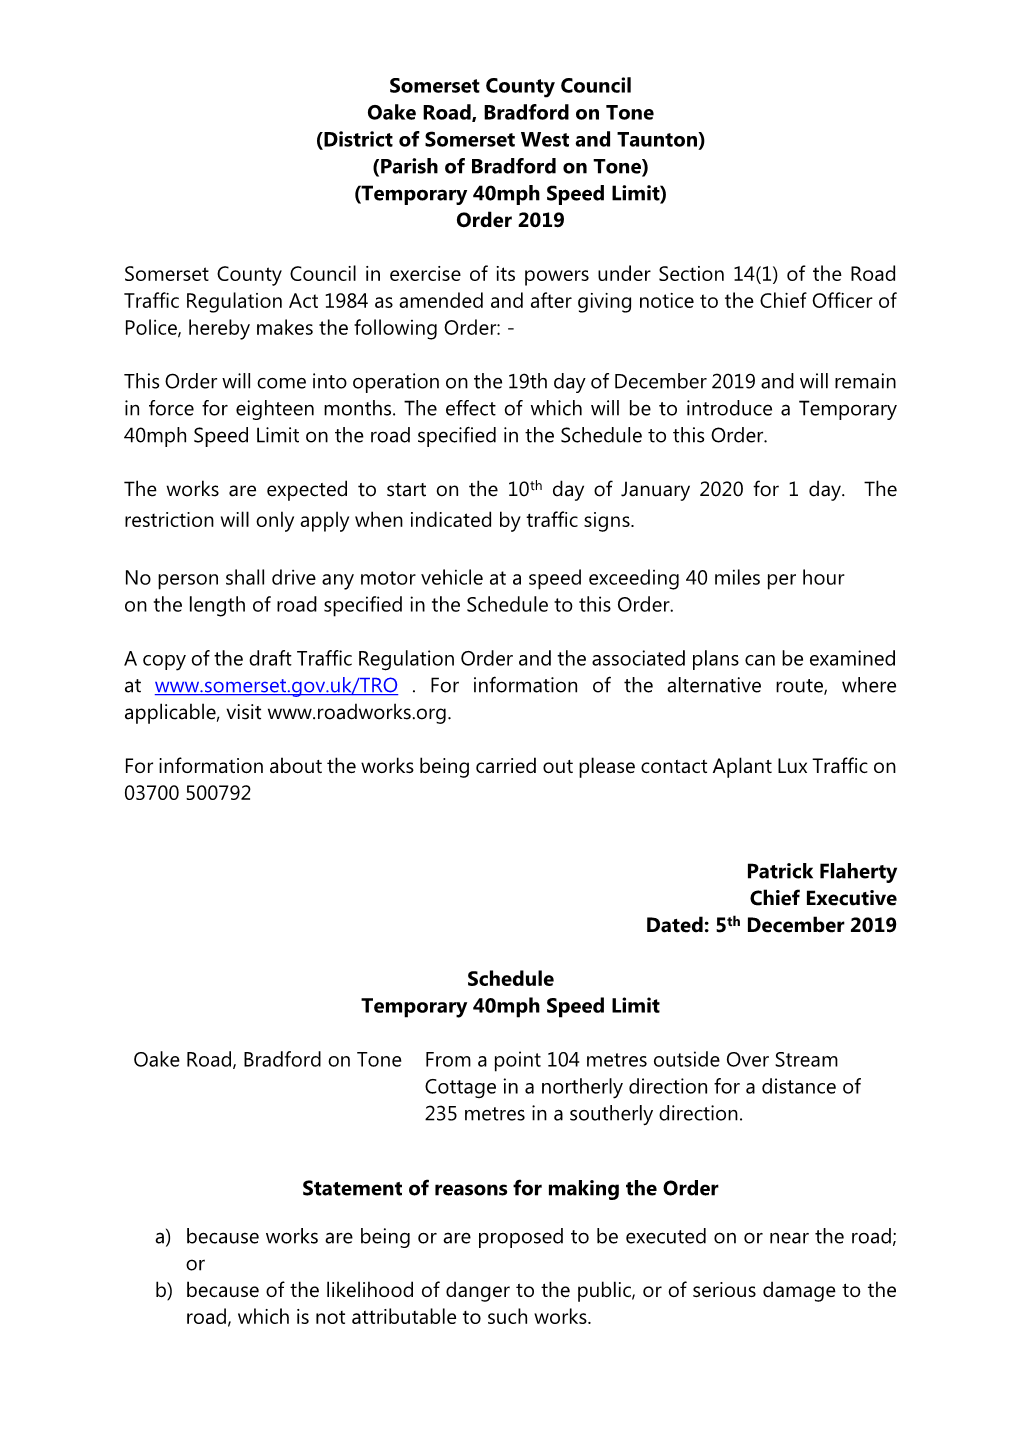 Somerset County Council Oake Road, Bradford on Tone (District of Somerset West and Taunton) (Parish of Bradford on Tone) (Temporary 40Mph Speed Limit) Order 2019